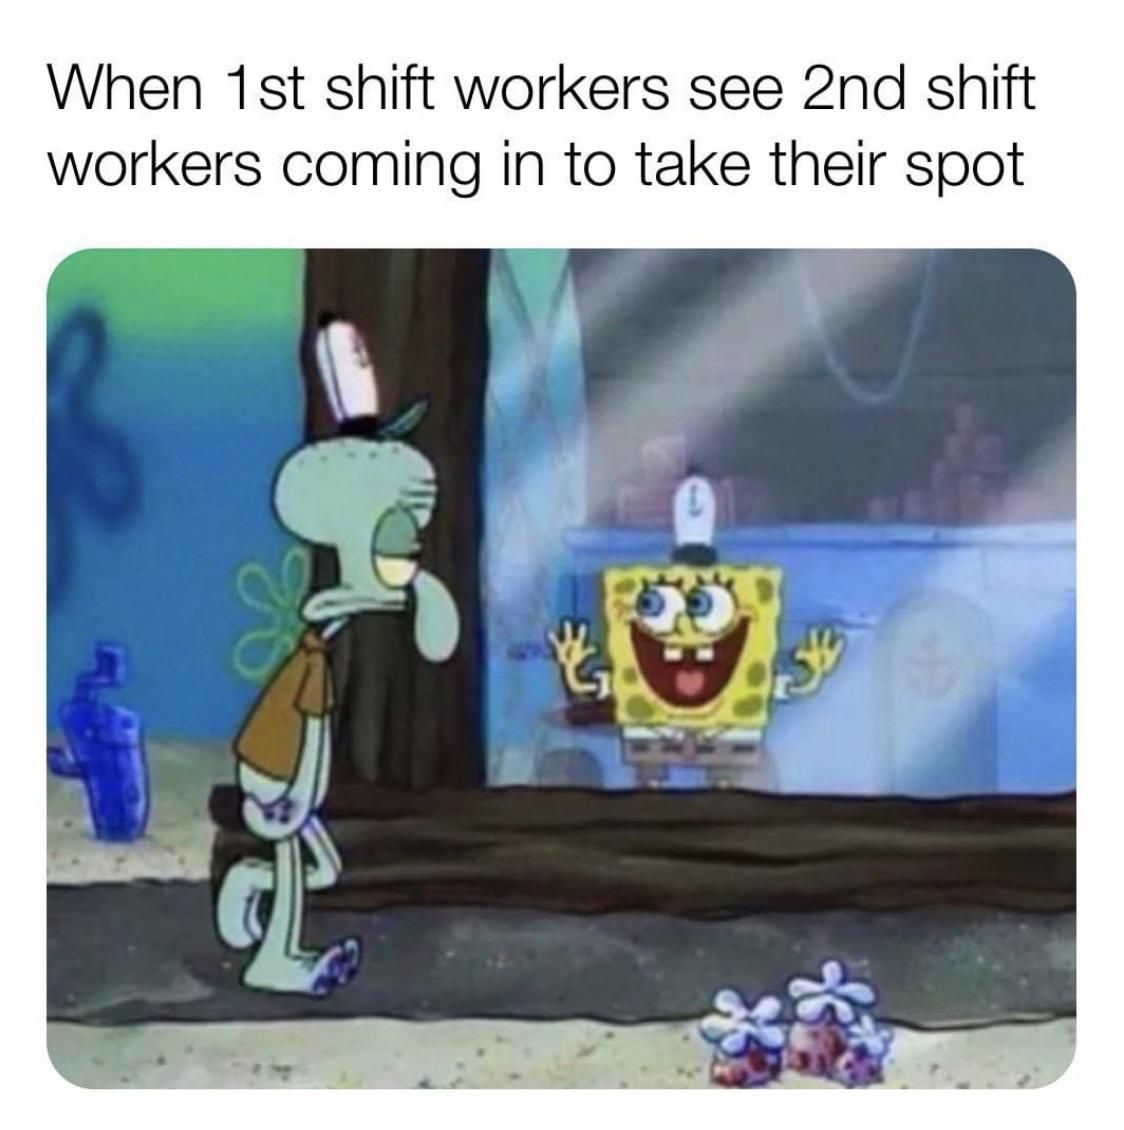 I’m the second worker